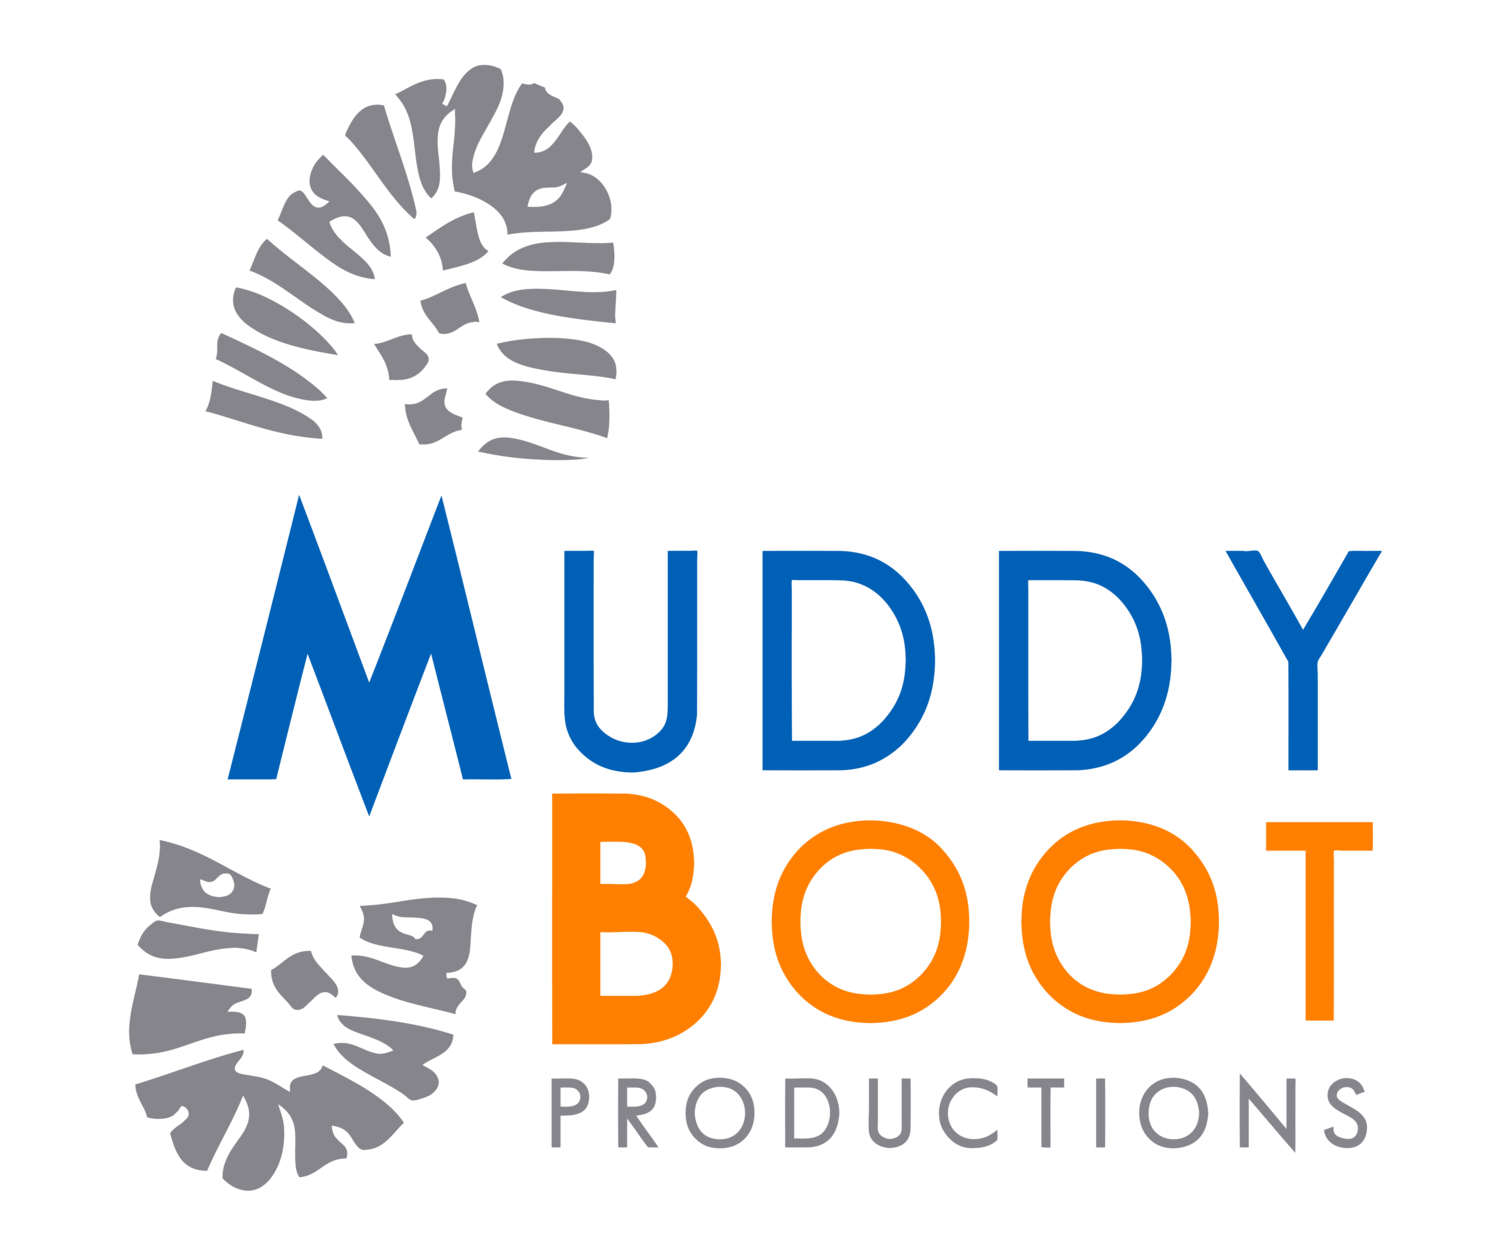 Muddy Boot Productions